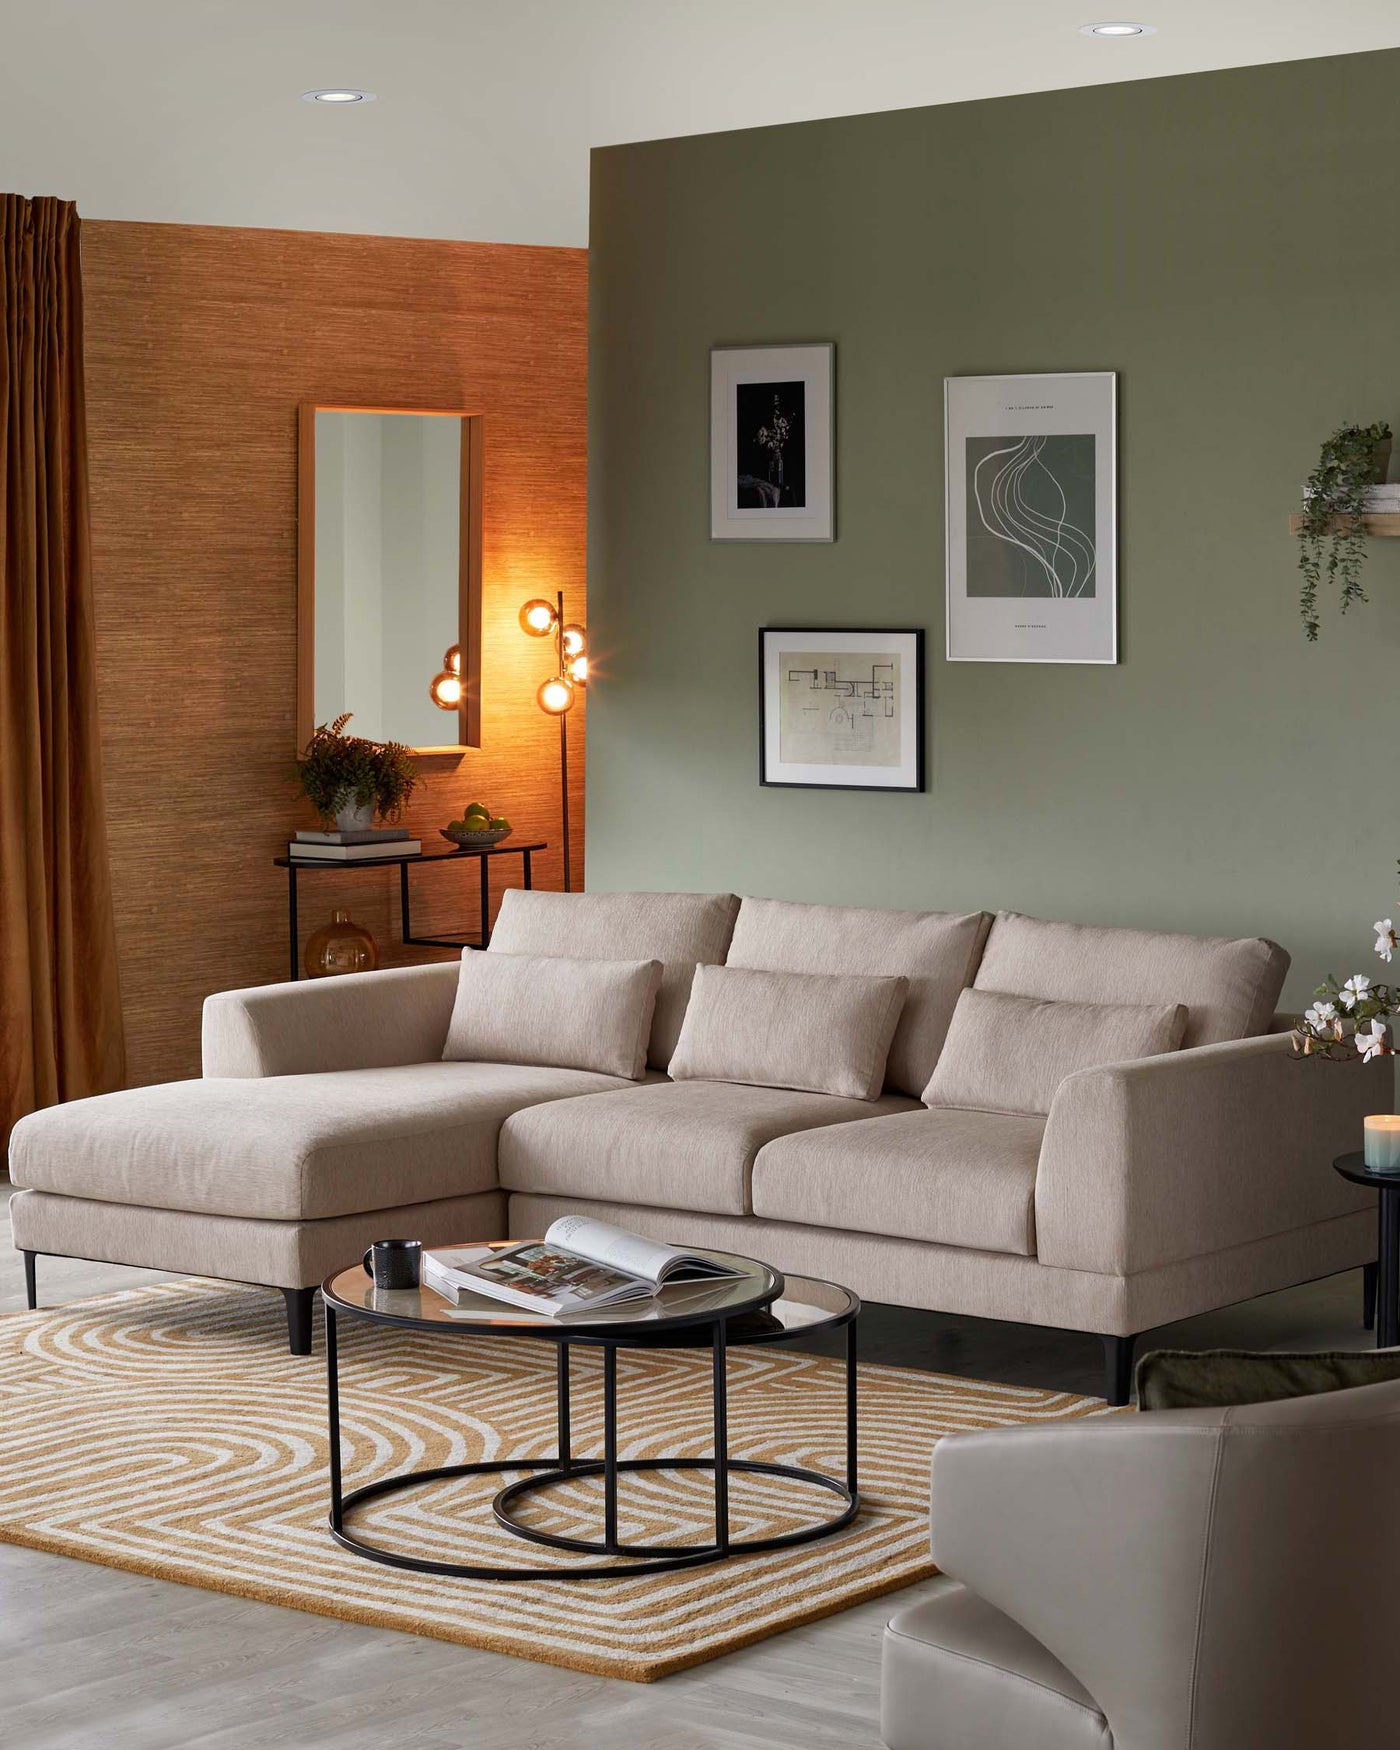 L-shaped beige fabric sectional sofa with clean lines and comfortable cushions, a rectangular wooden side table with a bottom shelf, and a pair of round black nesting coffee tables with glass tops on a patterned beige and white area rug.